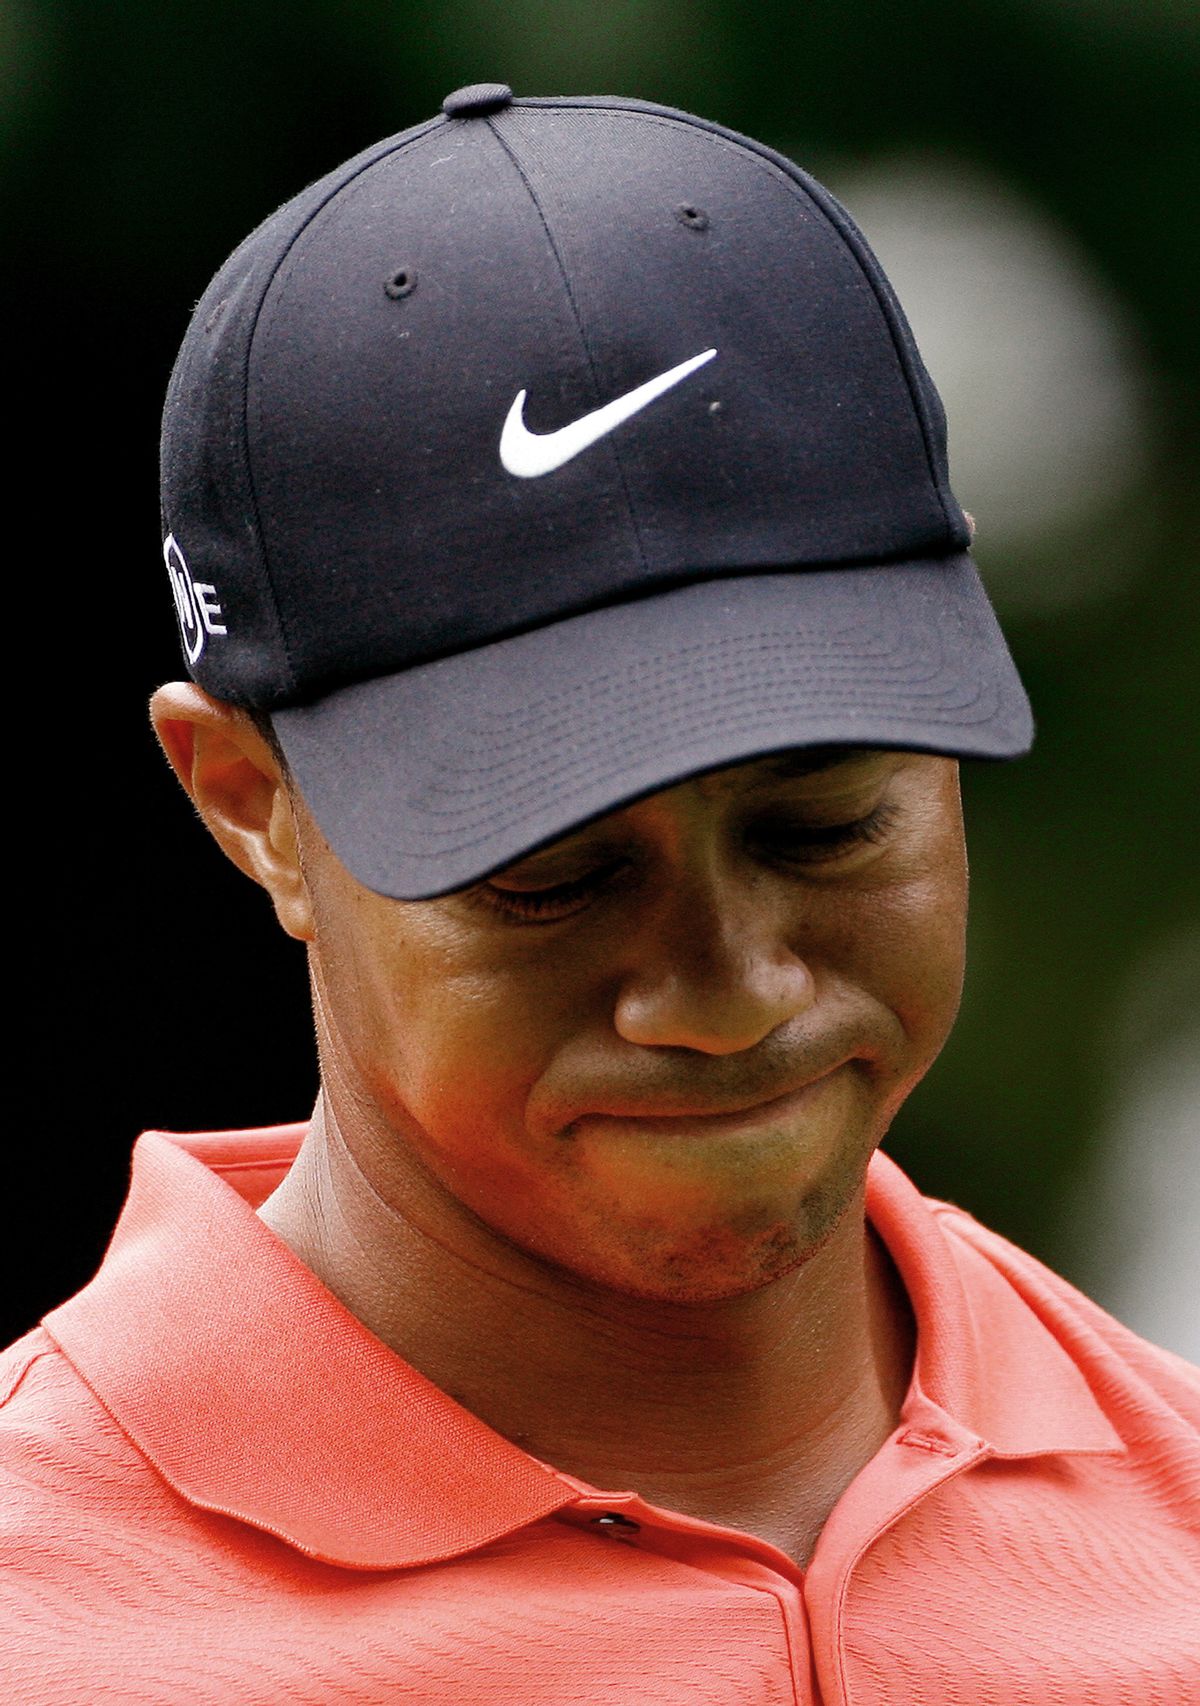 U.S. golfer Tiger Woods reacts after teeing off at the 14th hole during the World Match Play Championship at the Wentworth Club in Virginia Water, southeast England, September 14, 2006. World number one Woods, who arrived at Wentworth on the back of a remarkable run of five successive tournament wins, wielded a cold putter all day as he lost 4 &amp; 3 to fellow American Shaun Micheel. REUTERS/Kieran Doherty  (BRITAIN) (Reuters)